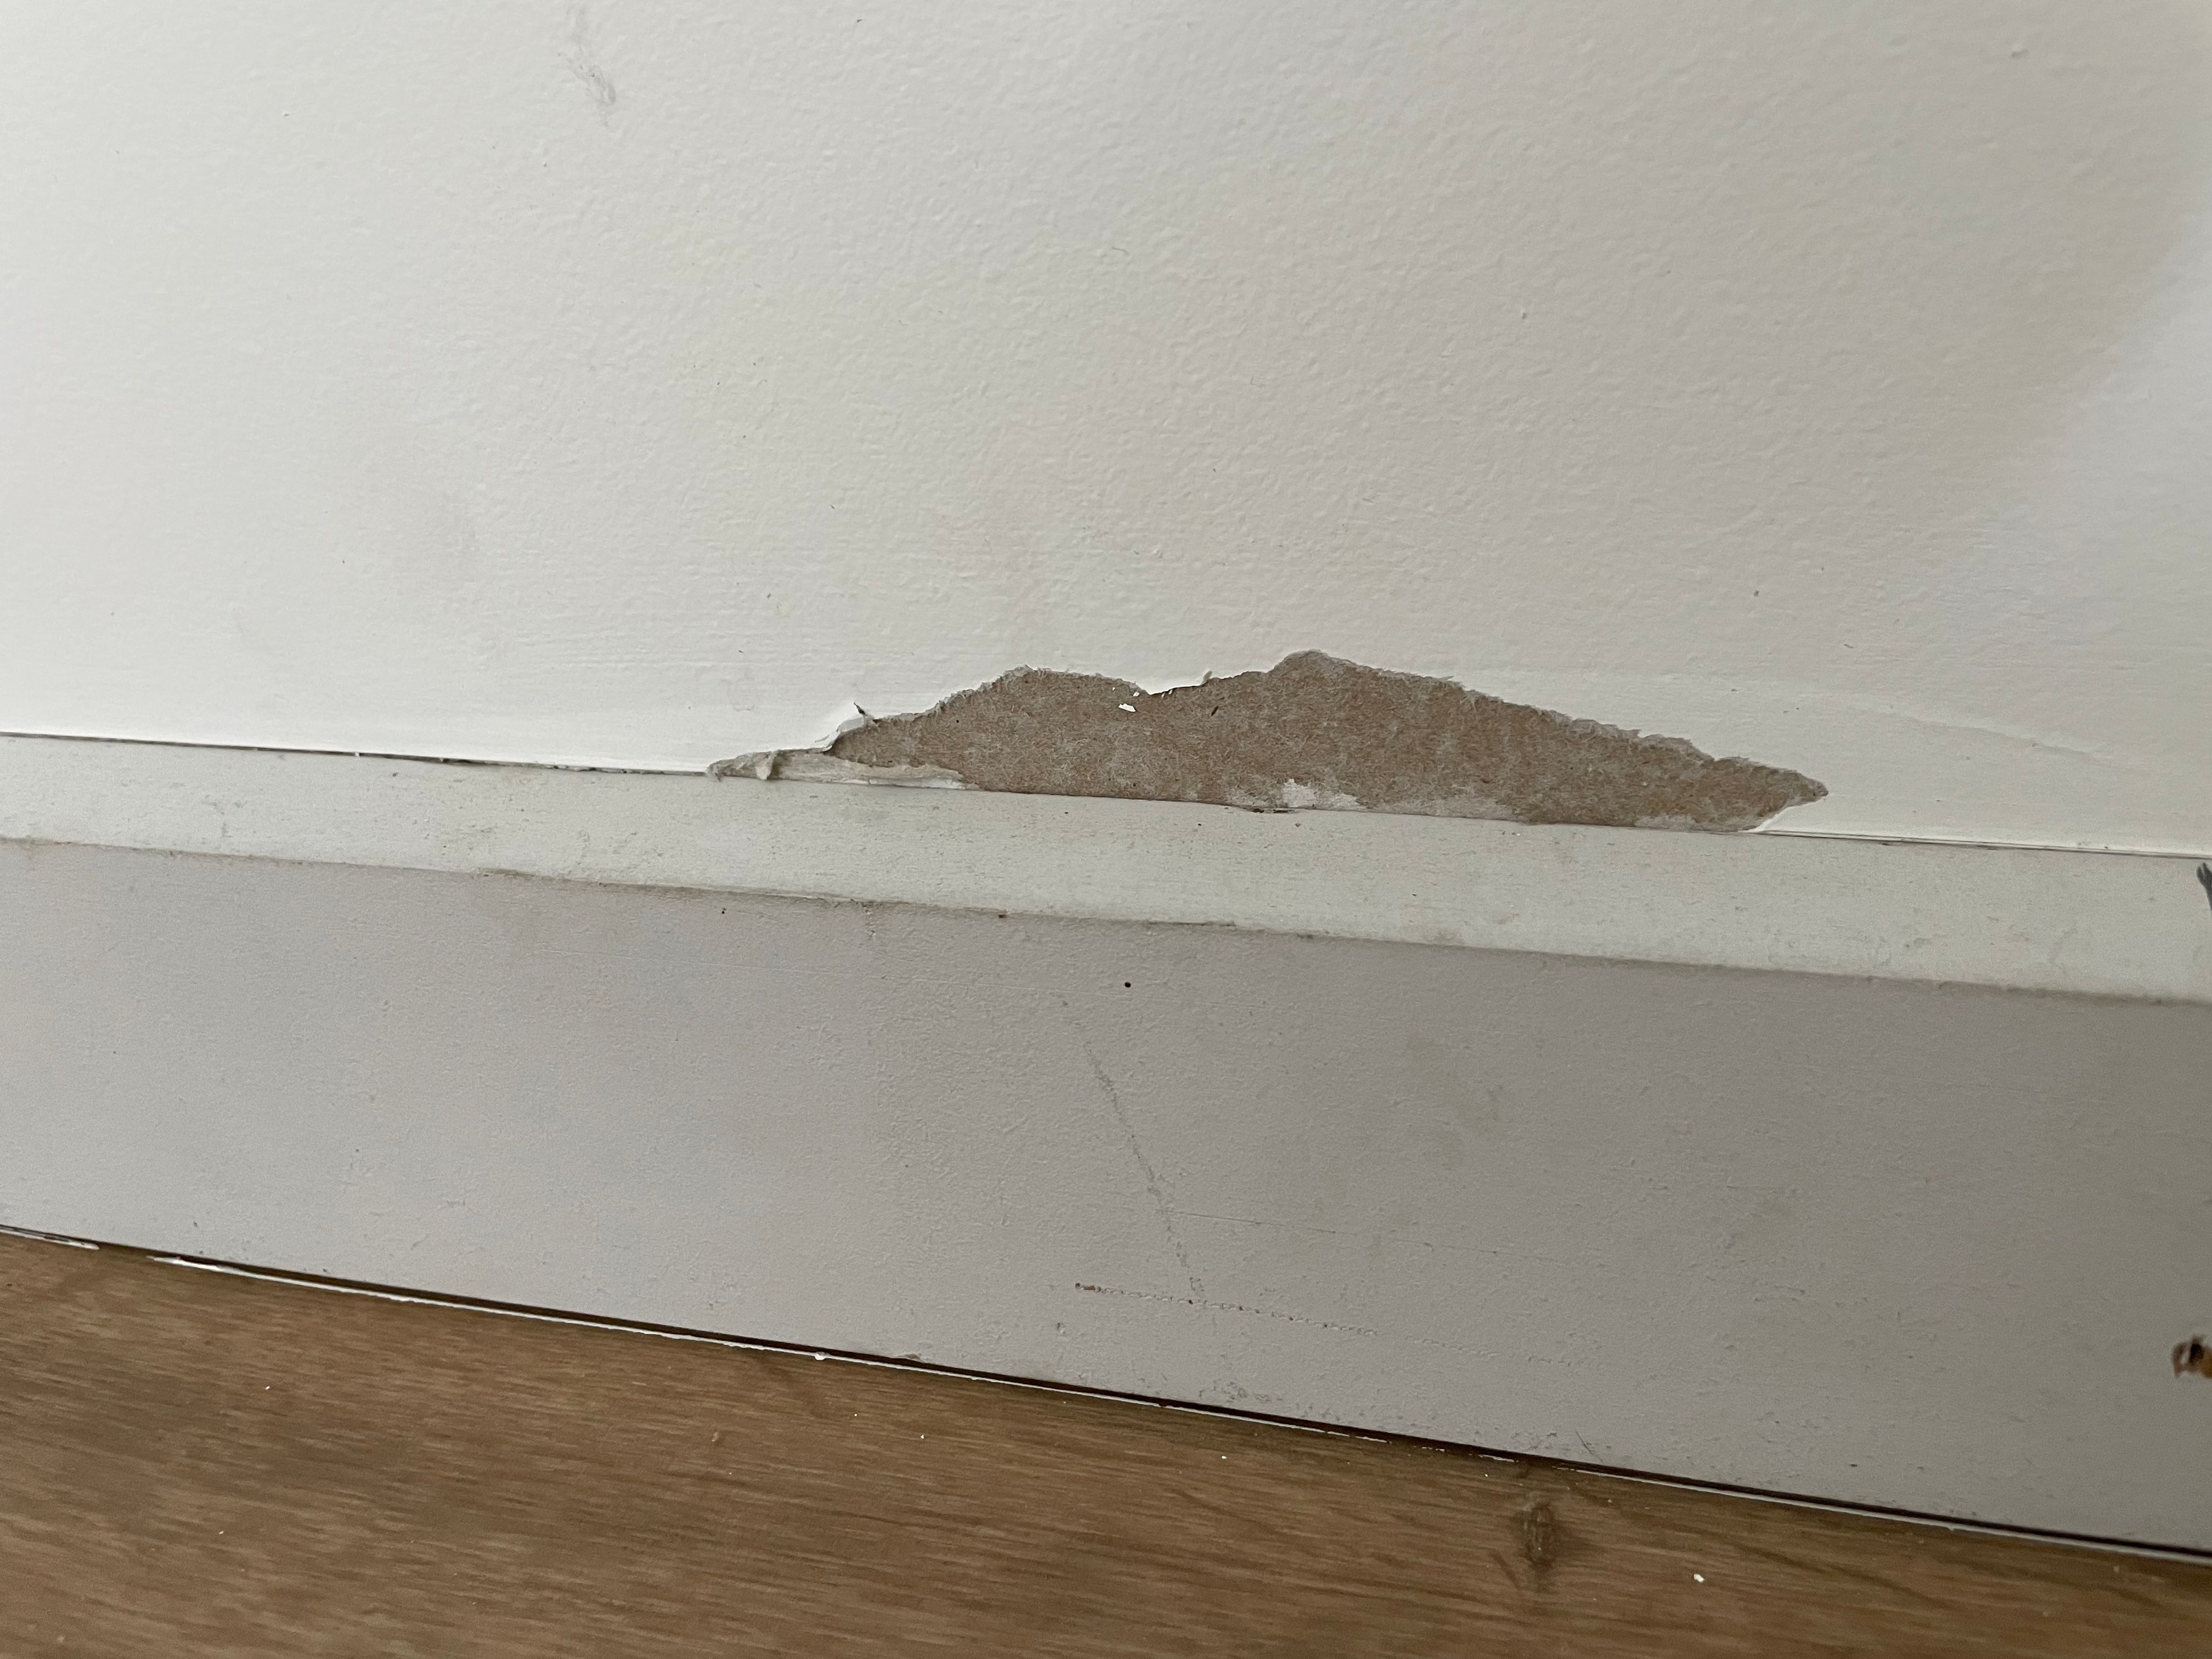 How to fix damaged plasterboard? | Bunnings Workshop community